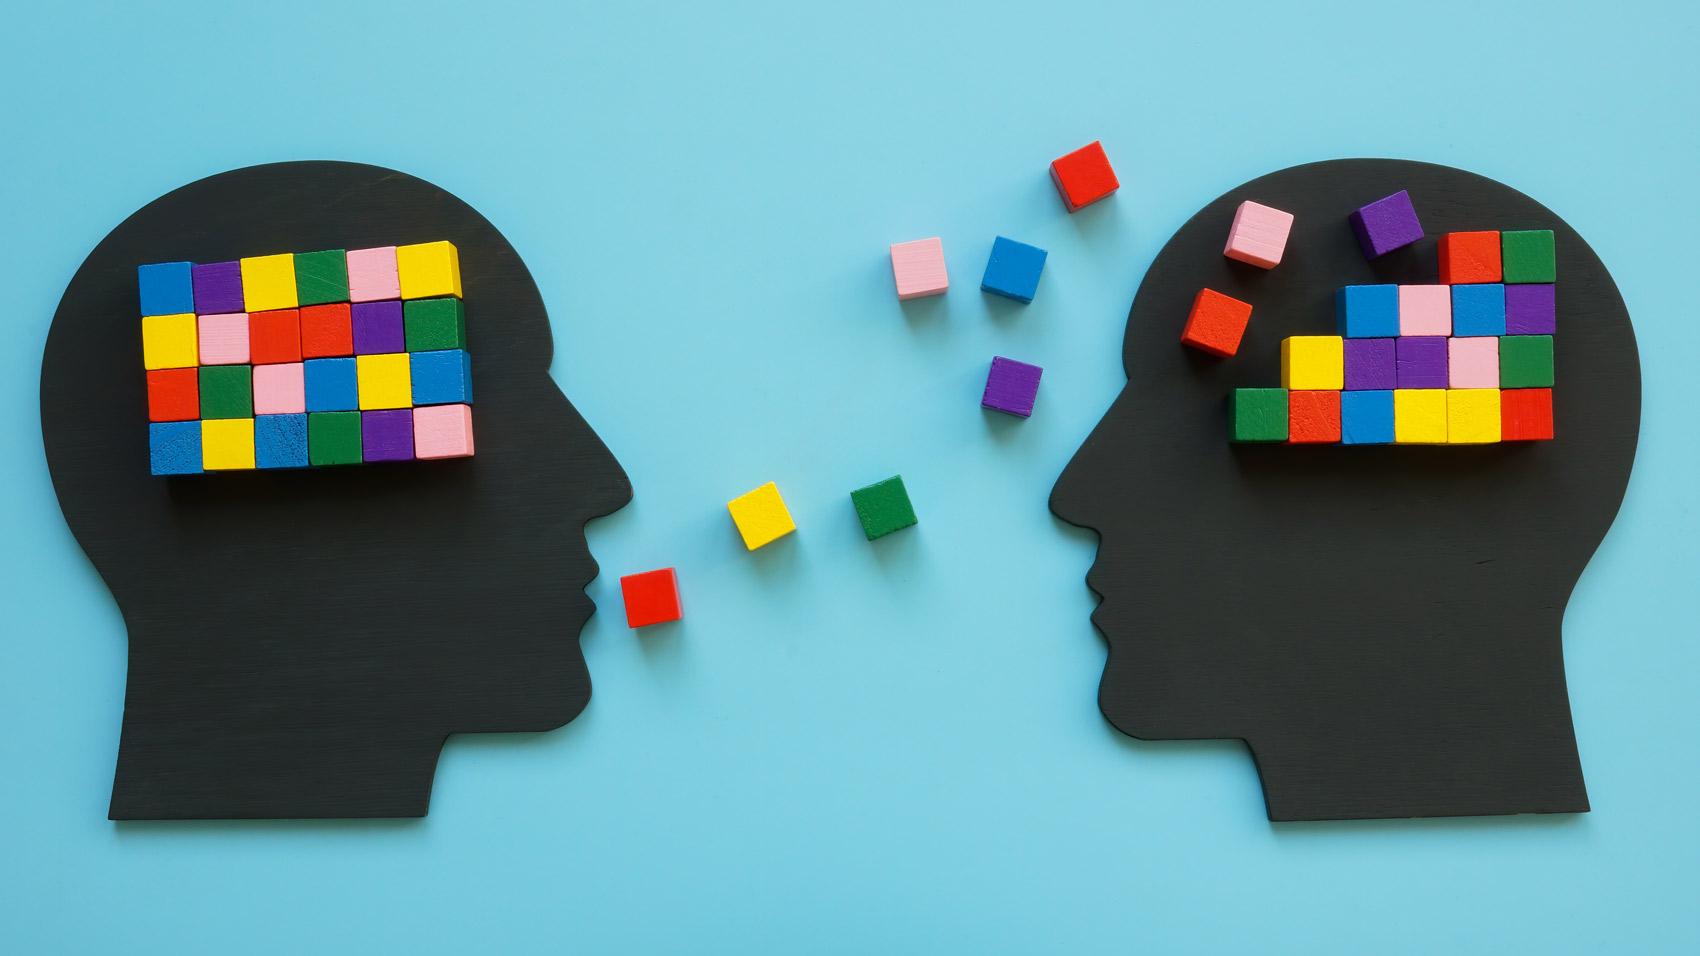 Two head silhouettes with colorful cubes